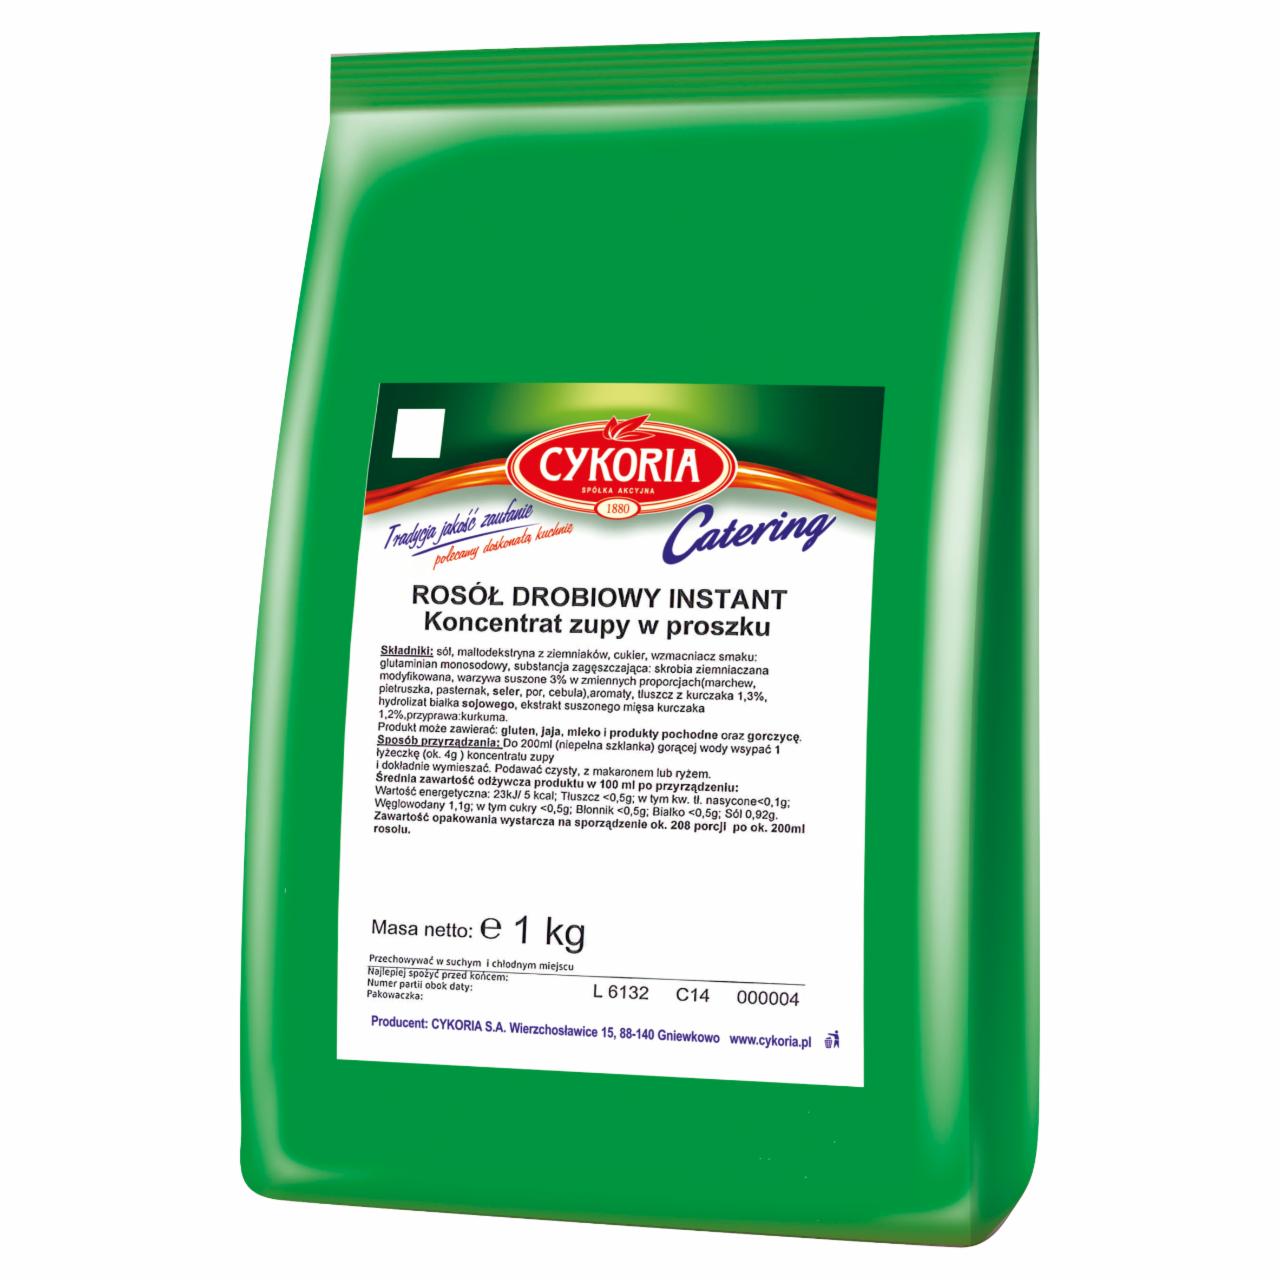 Photo - Cykoria Catering Concentrate Powder Soup Instant Chicken Broth 1 kg